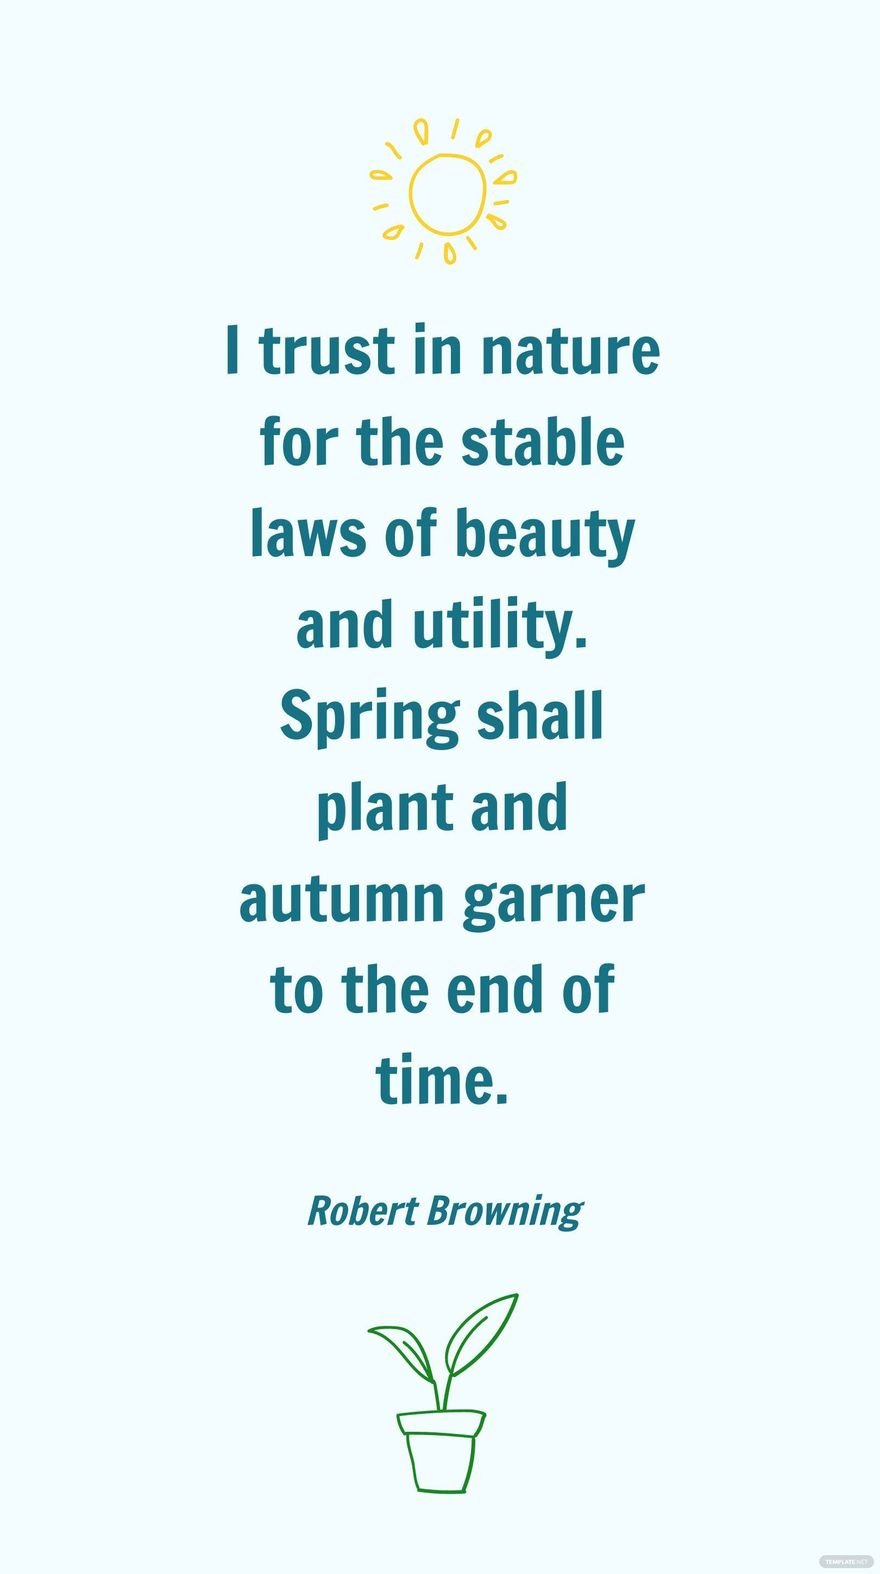 Free Robert Browning - I trust in nature for the stable laws of beauty and utility. Spring shall plant and autumn garner to the end of time. in JPG